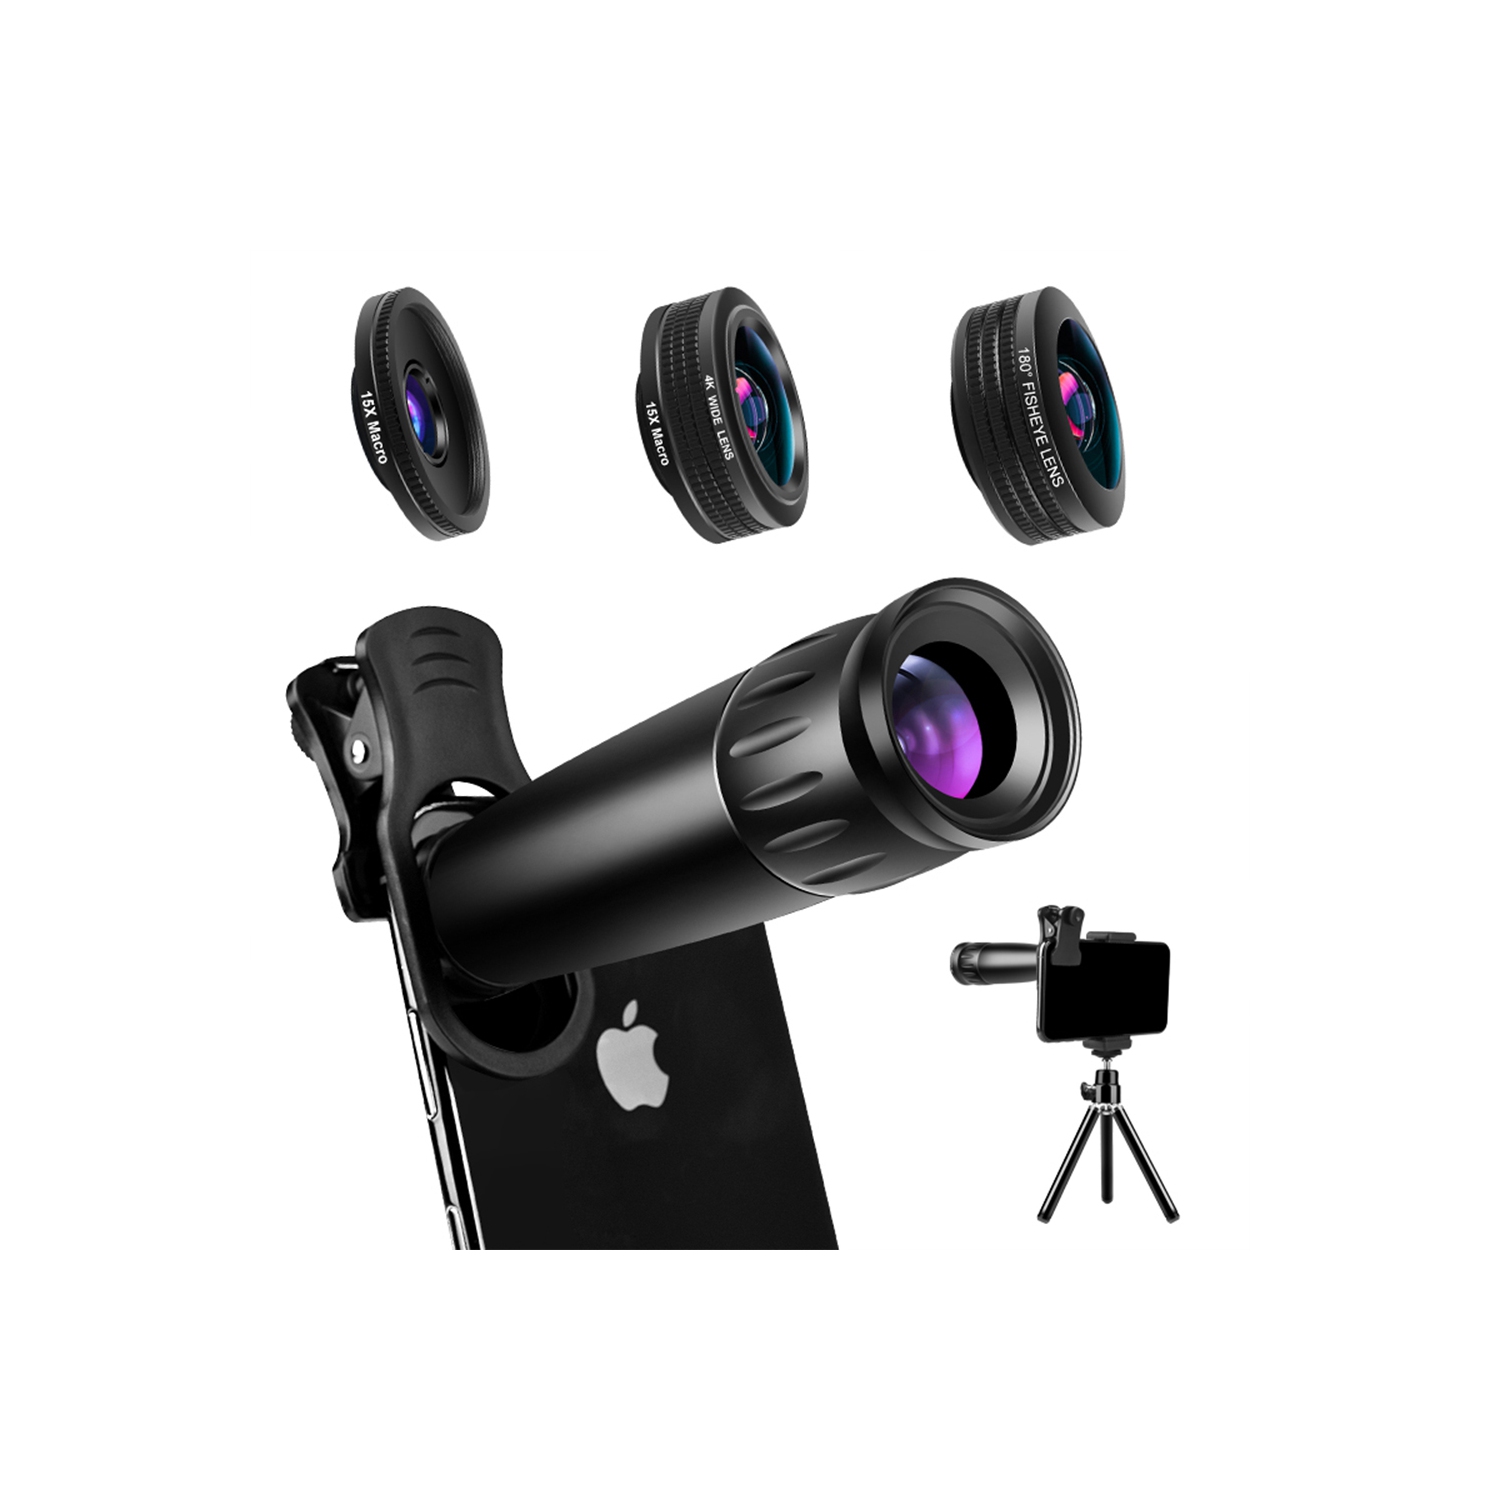 navor 4 in 1 Phone Camera Lens Kit, 15X Telephoto Lens, 15X Macro Lens, 120° Wide Angle Lens, 180° Fisheye Lens, Photography Kit Compatible with iPhone Samsung Huawei